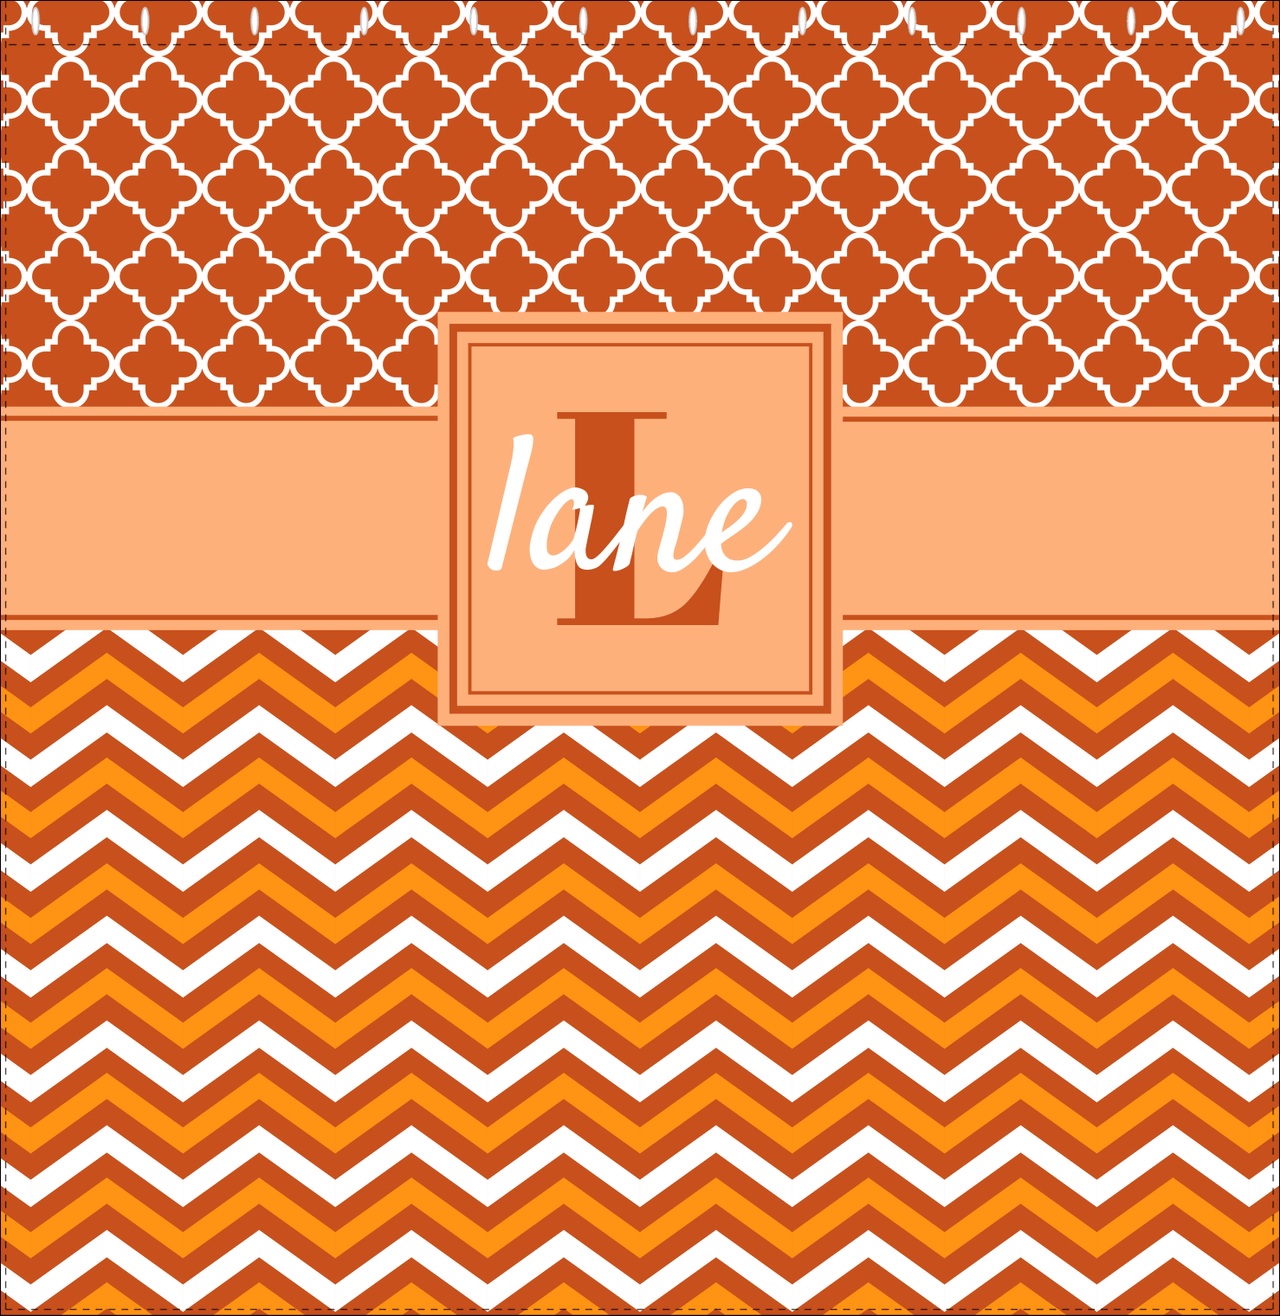 Personalized Quatrefoil and Chevron II Shower Curtain - Orange and White - Square Nameplate - Decorate View